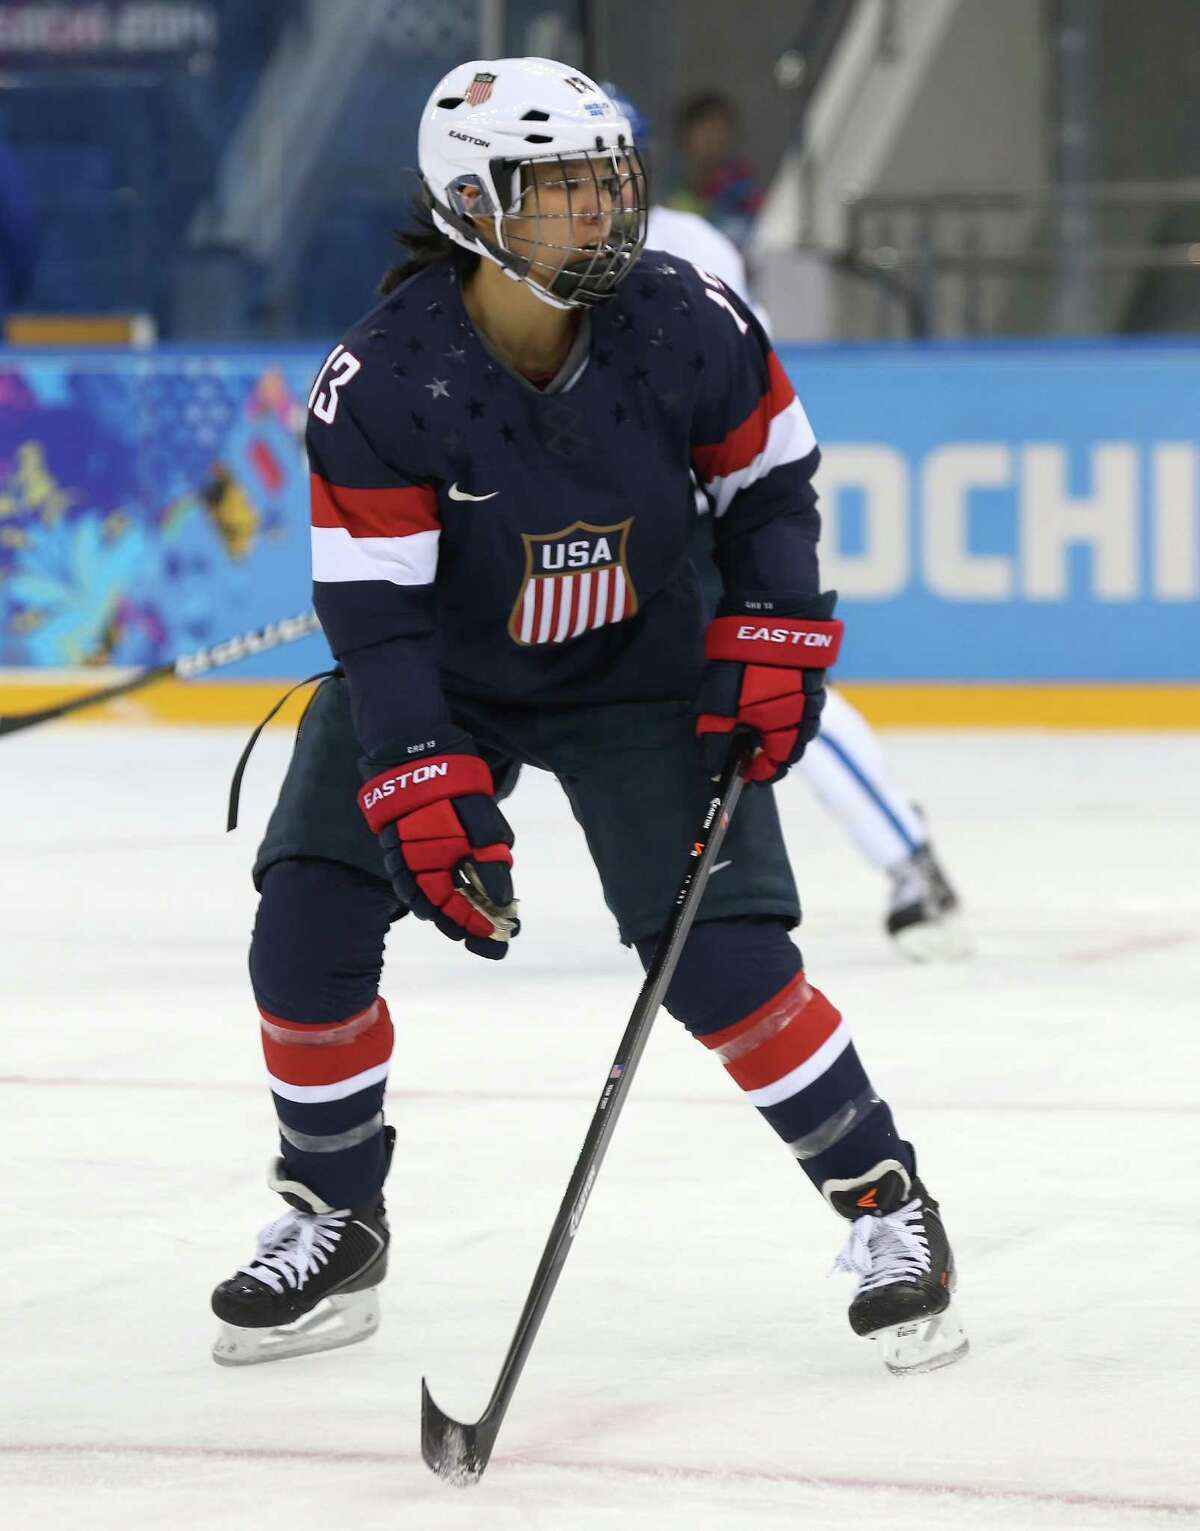 SOCHI, RUSSIA - FEBRUARY 08: Julie Chu #13 of United States looks on against Finland during the Women's Ice Hockey Preliminary Round Group A Game on day 1 of the Sochi 2014 Winter Olympics at Shayba Arena on February 8, 2014 in Sochi, Russia. (Photo by Bruce Bennett/Getty Images) ORG XMIT: 461426669